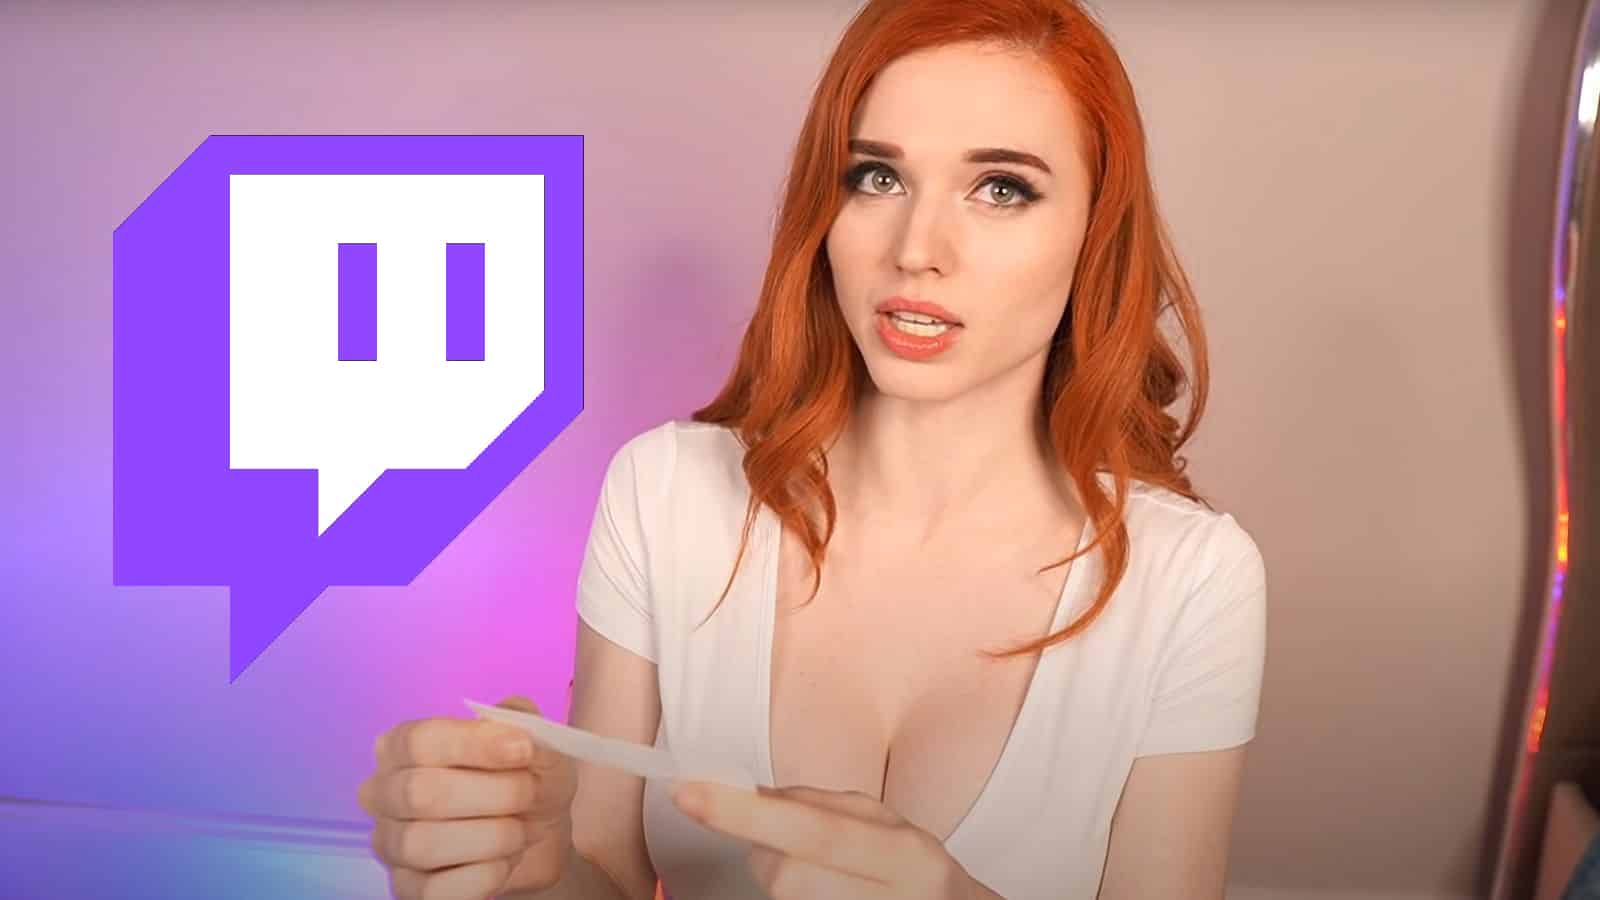 Loveanth NSFW Content Bans Twitch Streamer